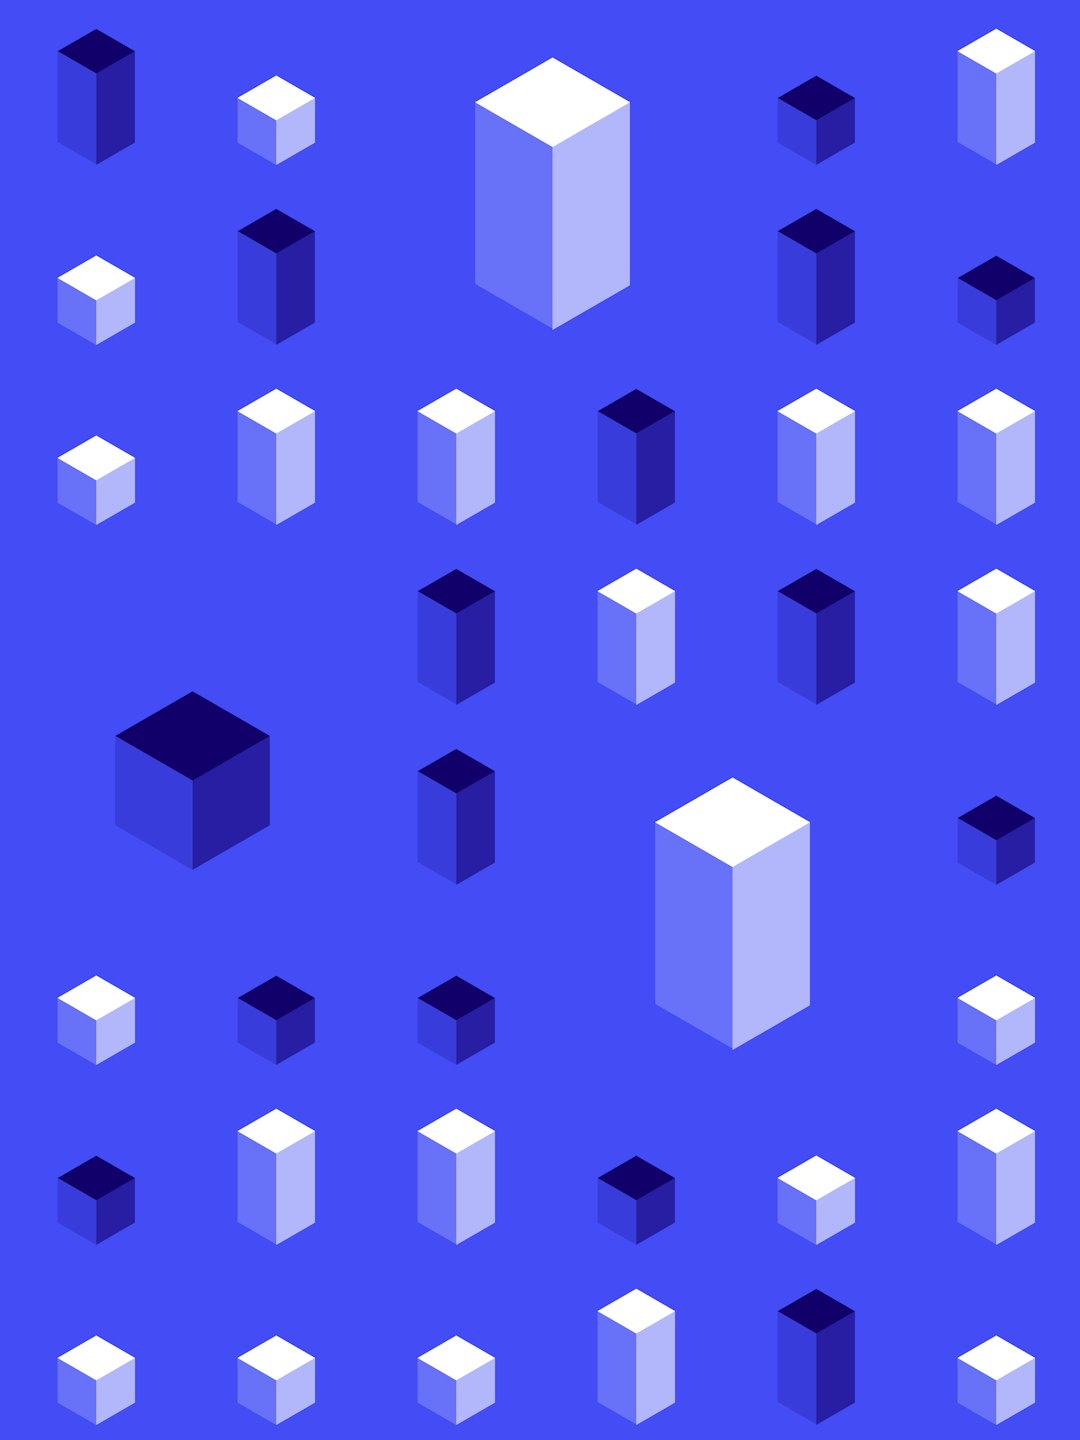 isometric pattern of cubes on a blue background, in a simple vector art style using white and dark purple colors, a minimalistic design featuring flat illustration with geometric shapes, digital art –ar 3:4